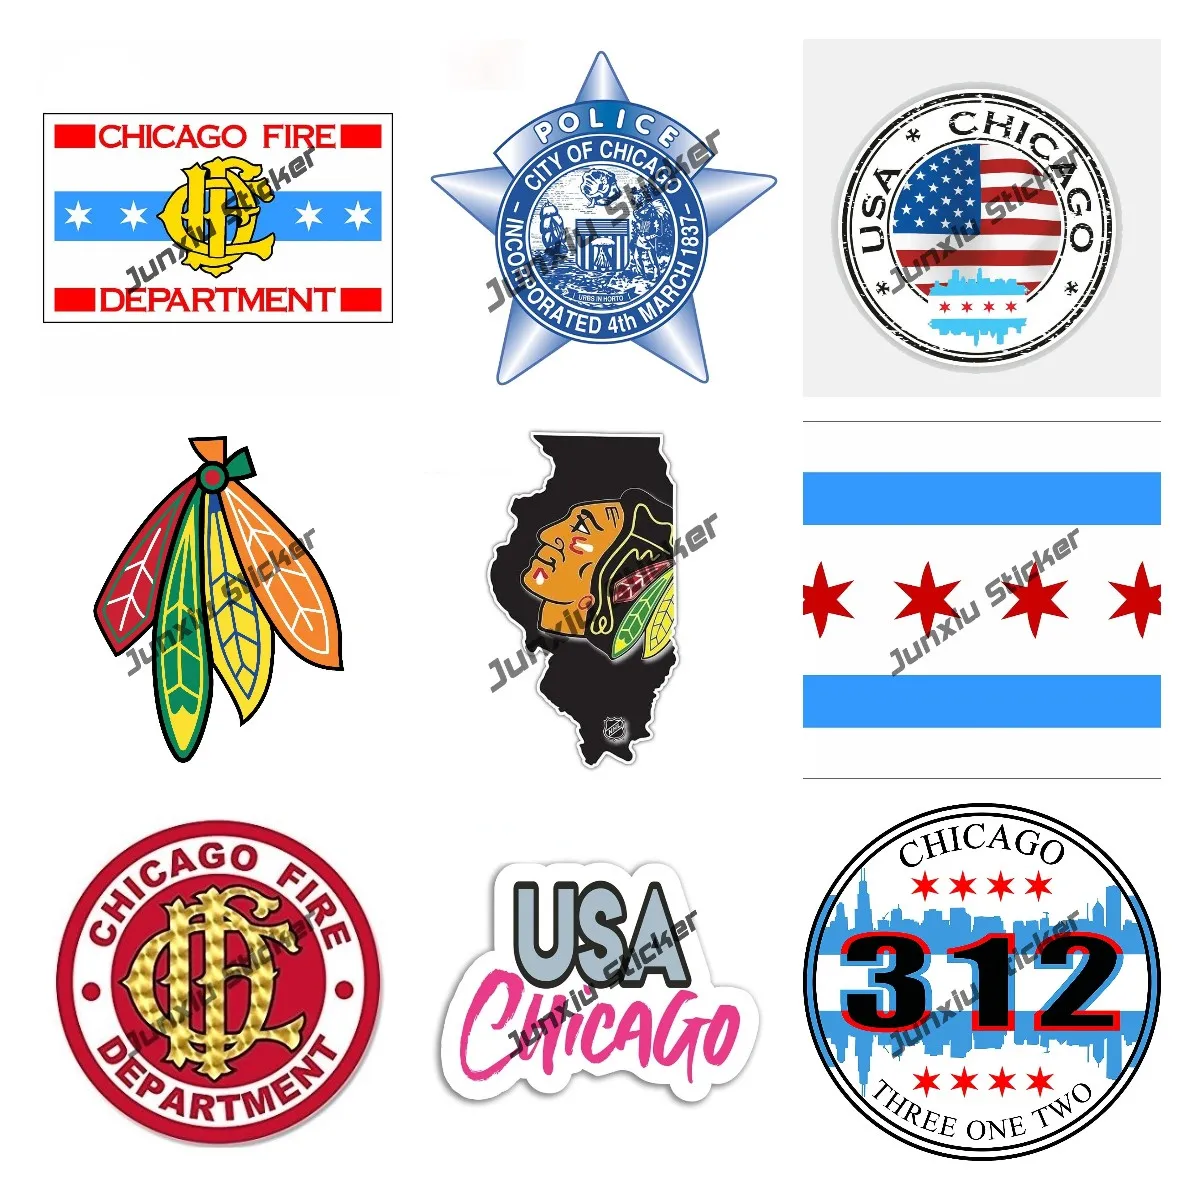 

Chicago Illinois Flag Bumper Sticker ROUND Chicago Fire Department Seal Sticker (cfd Logo Dept) Graphic Auto Wall Laptop Cell